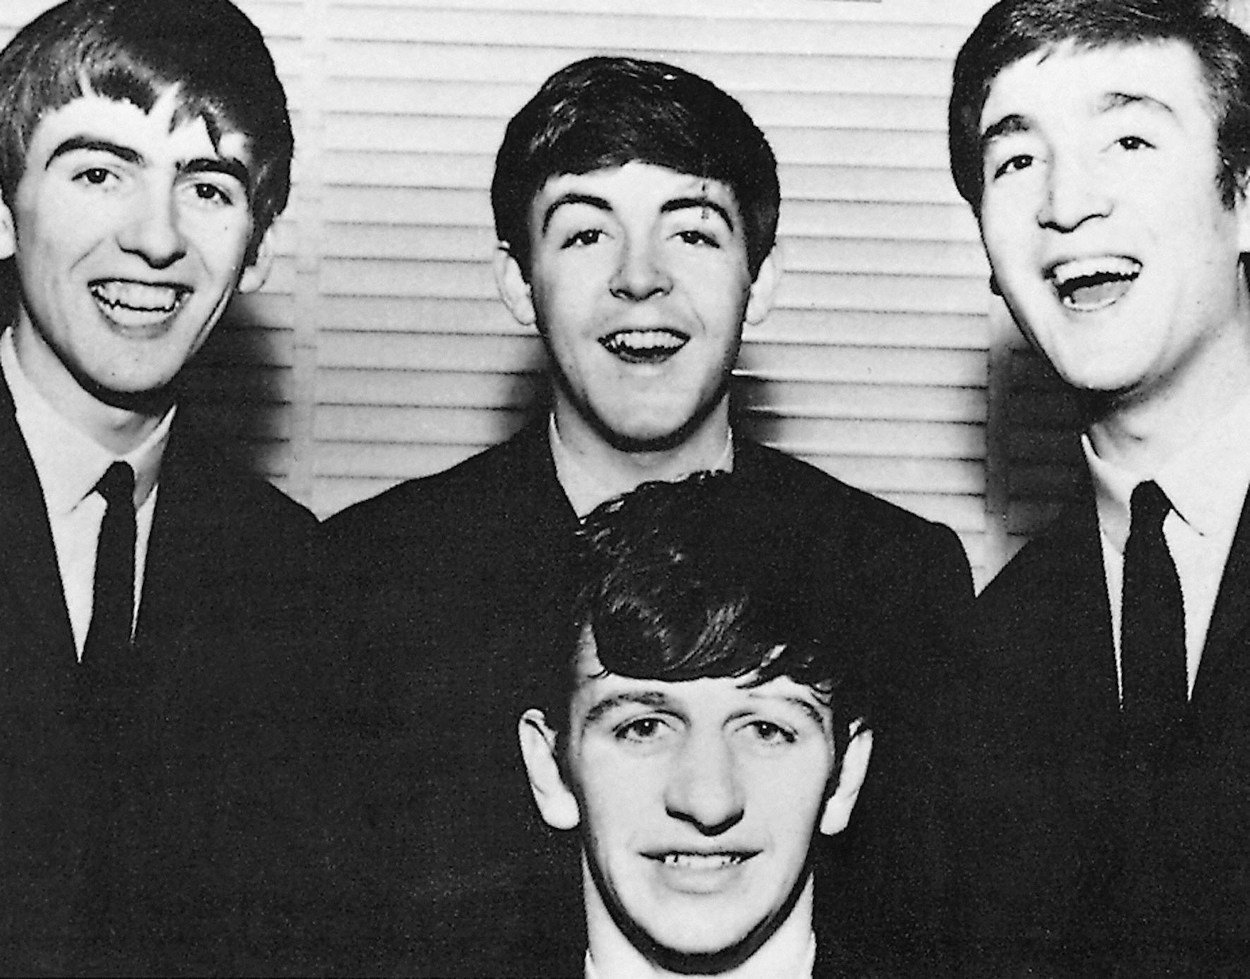 Ringo Starr (front) and George Harrison (rear, from left), Paul McCartney, and John Lennon of The Beatles in 1962, just two years after Eddie Cochran's tragic death might have ensured that Ringo joined The Beatles.